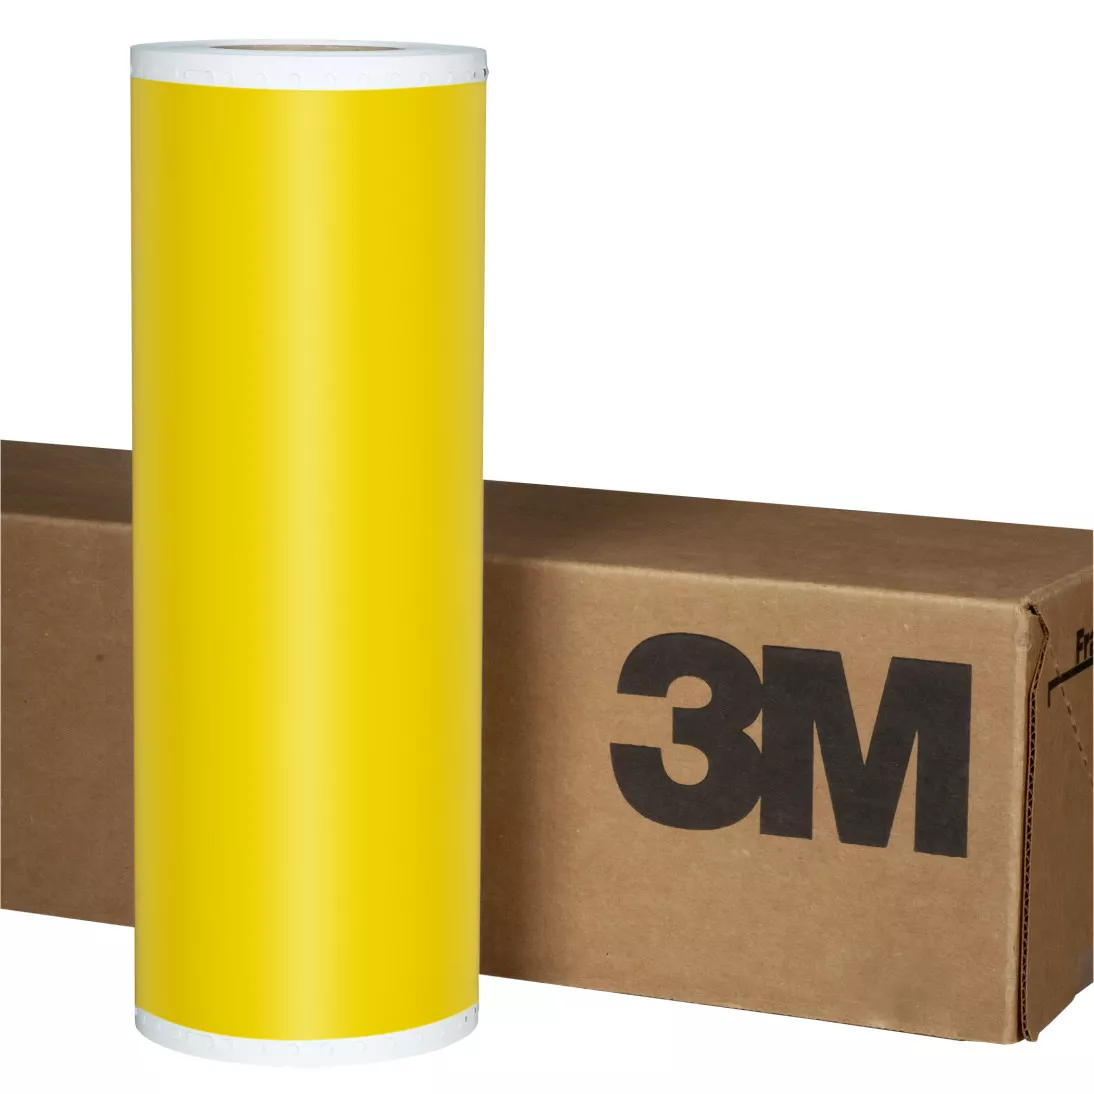 3M™ Scotchlite™ Plus Flexible Reflective Film 680-91, School Bus Yellow,
Controltac™ Adhesive, 24 in x 50 yd